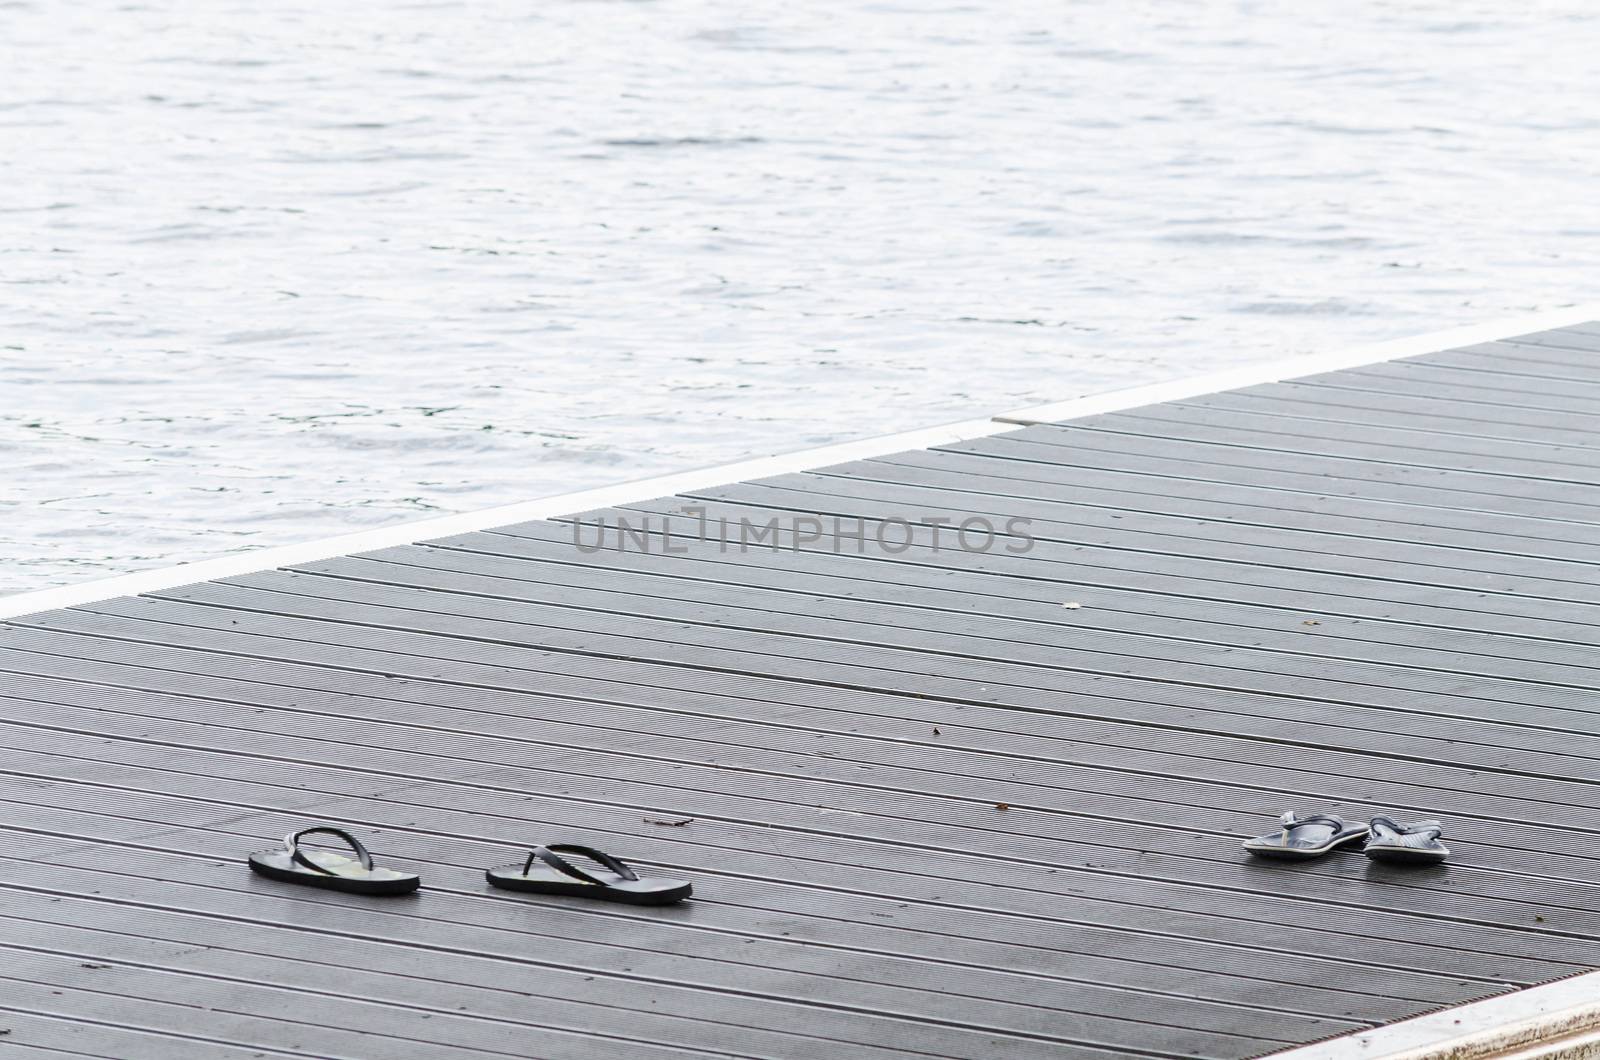 Sandals on a jetty by JFsPic